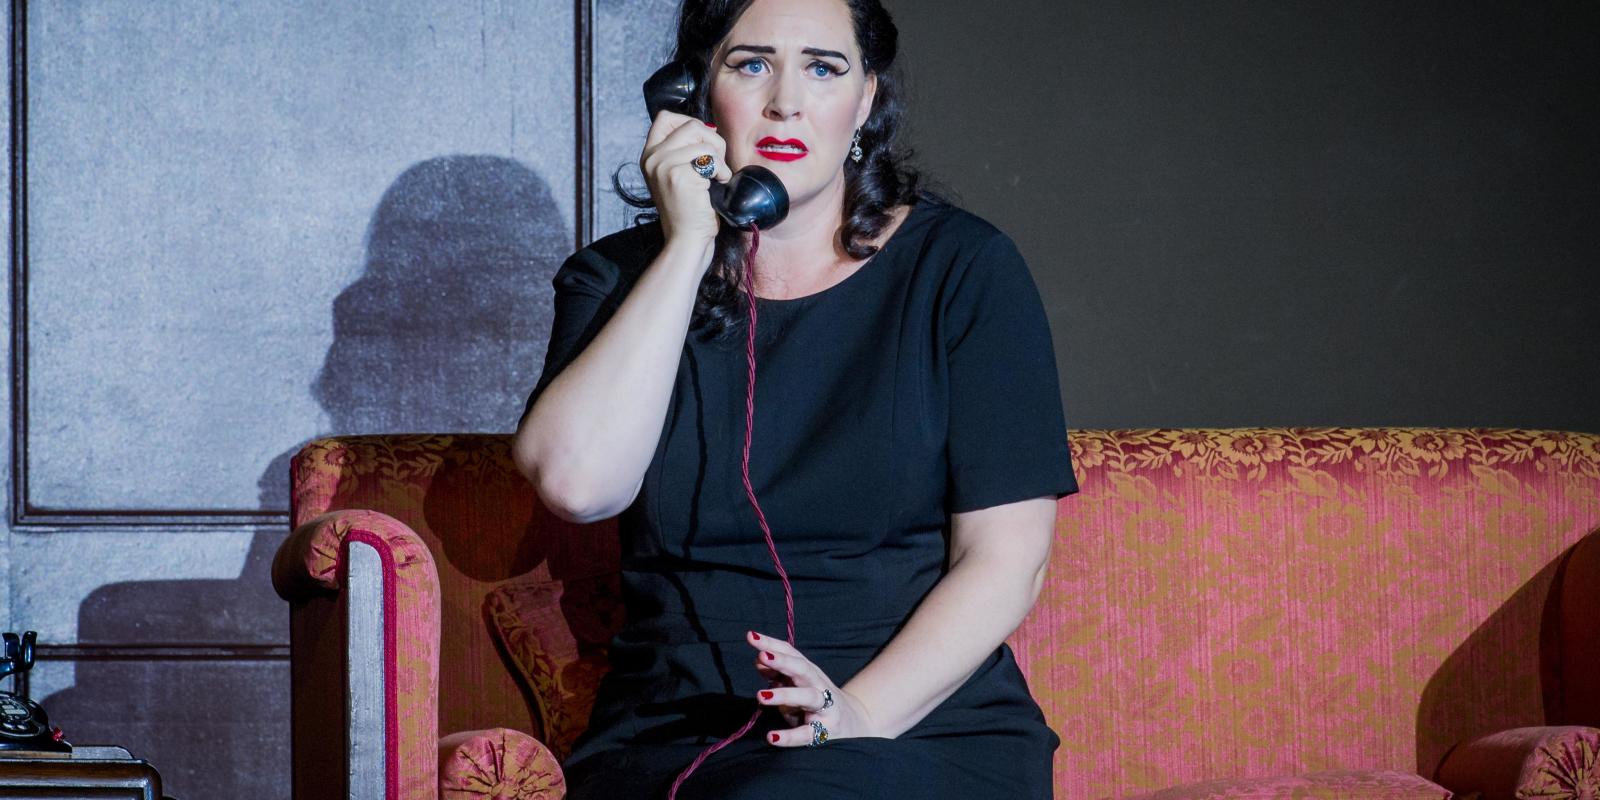 Woman sitting on a red sofa while speaking on the phone in ENO's Don Giovanni